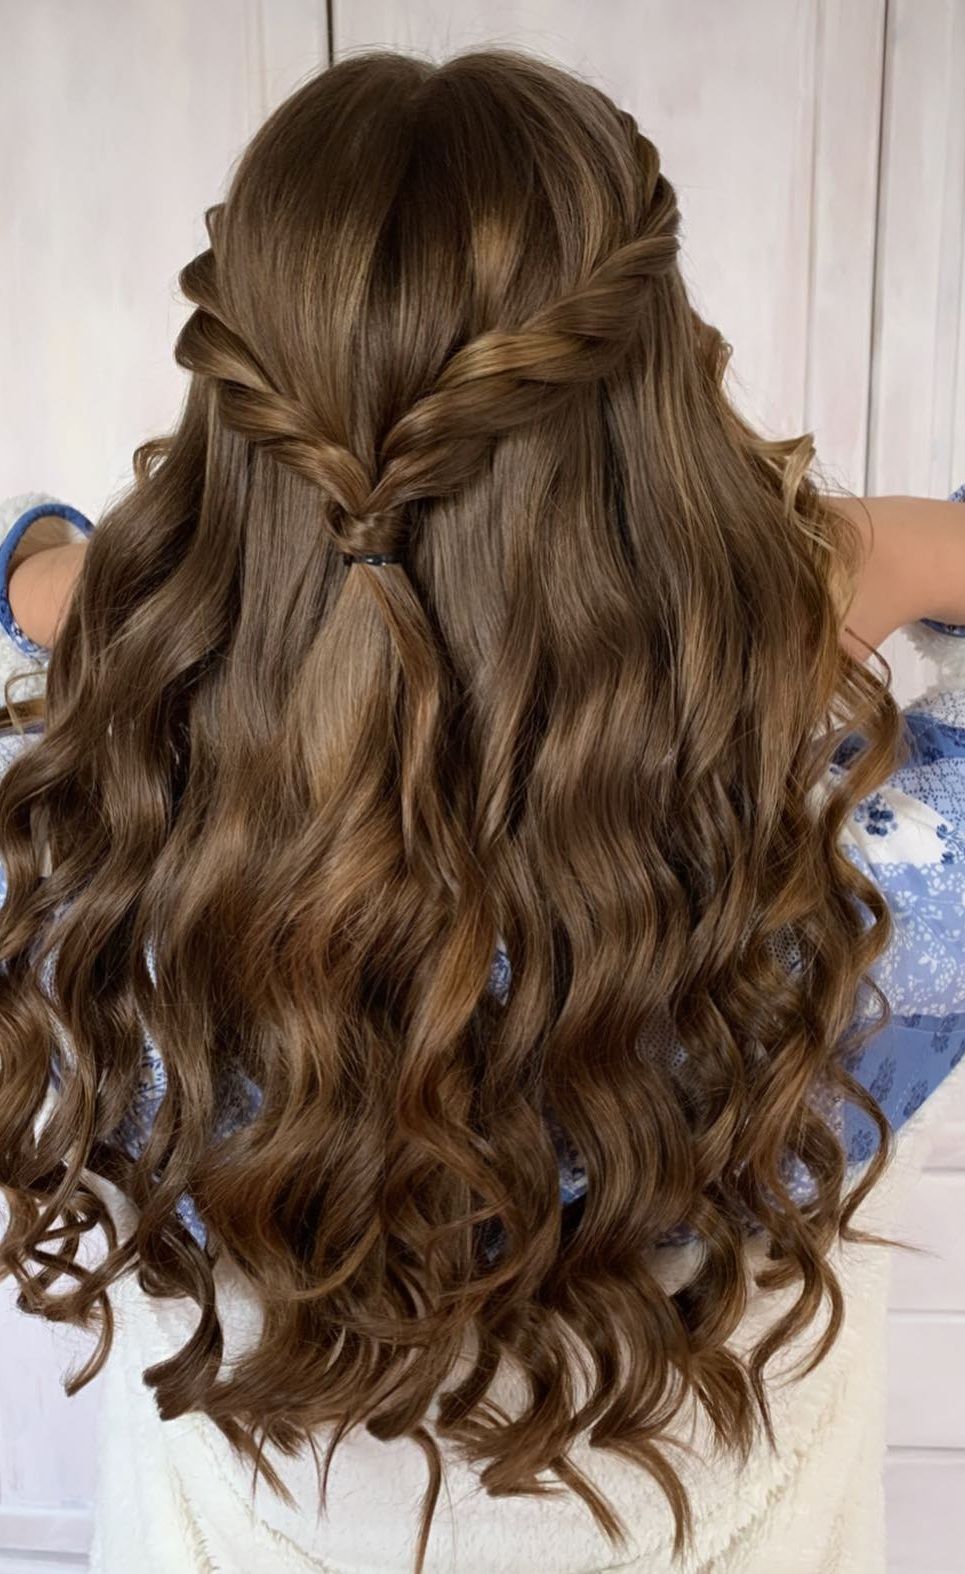 hairstyle open hair